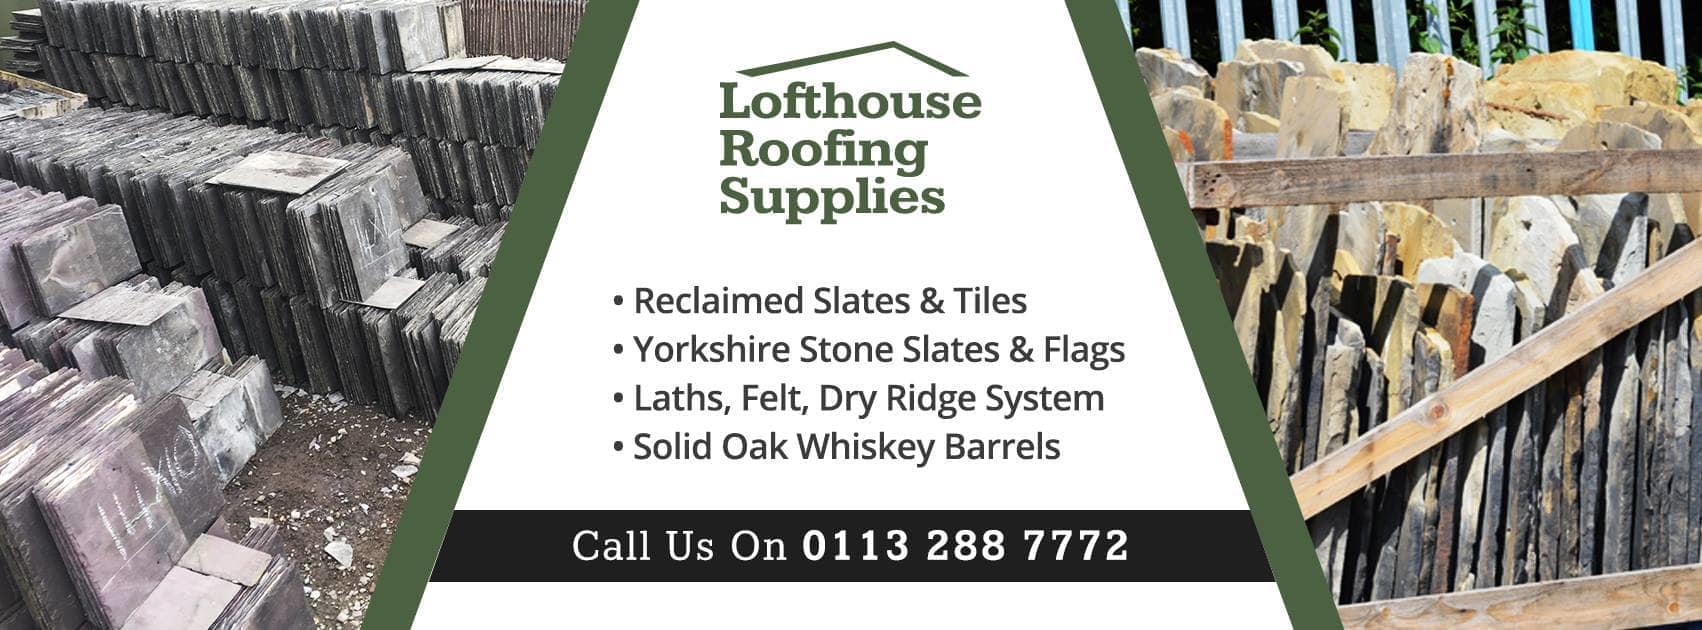 Images Lofthouse Roofing Supplies